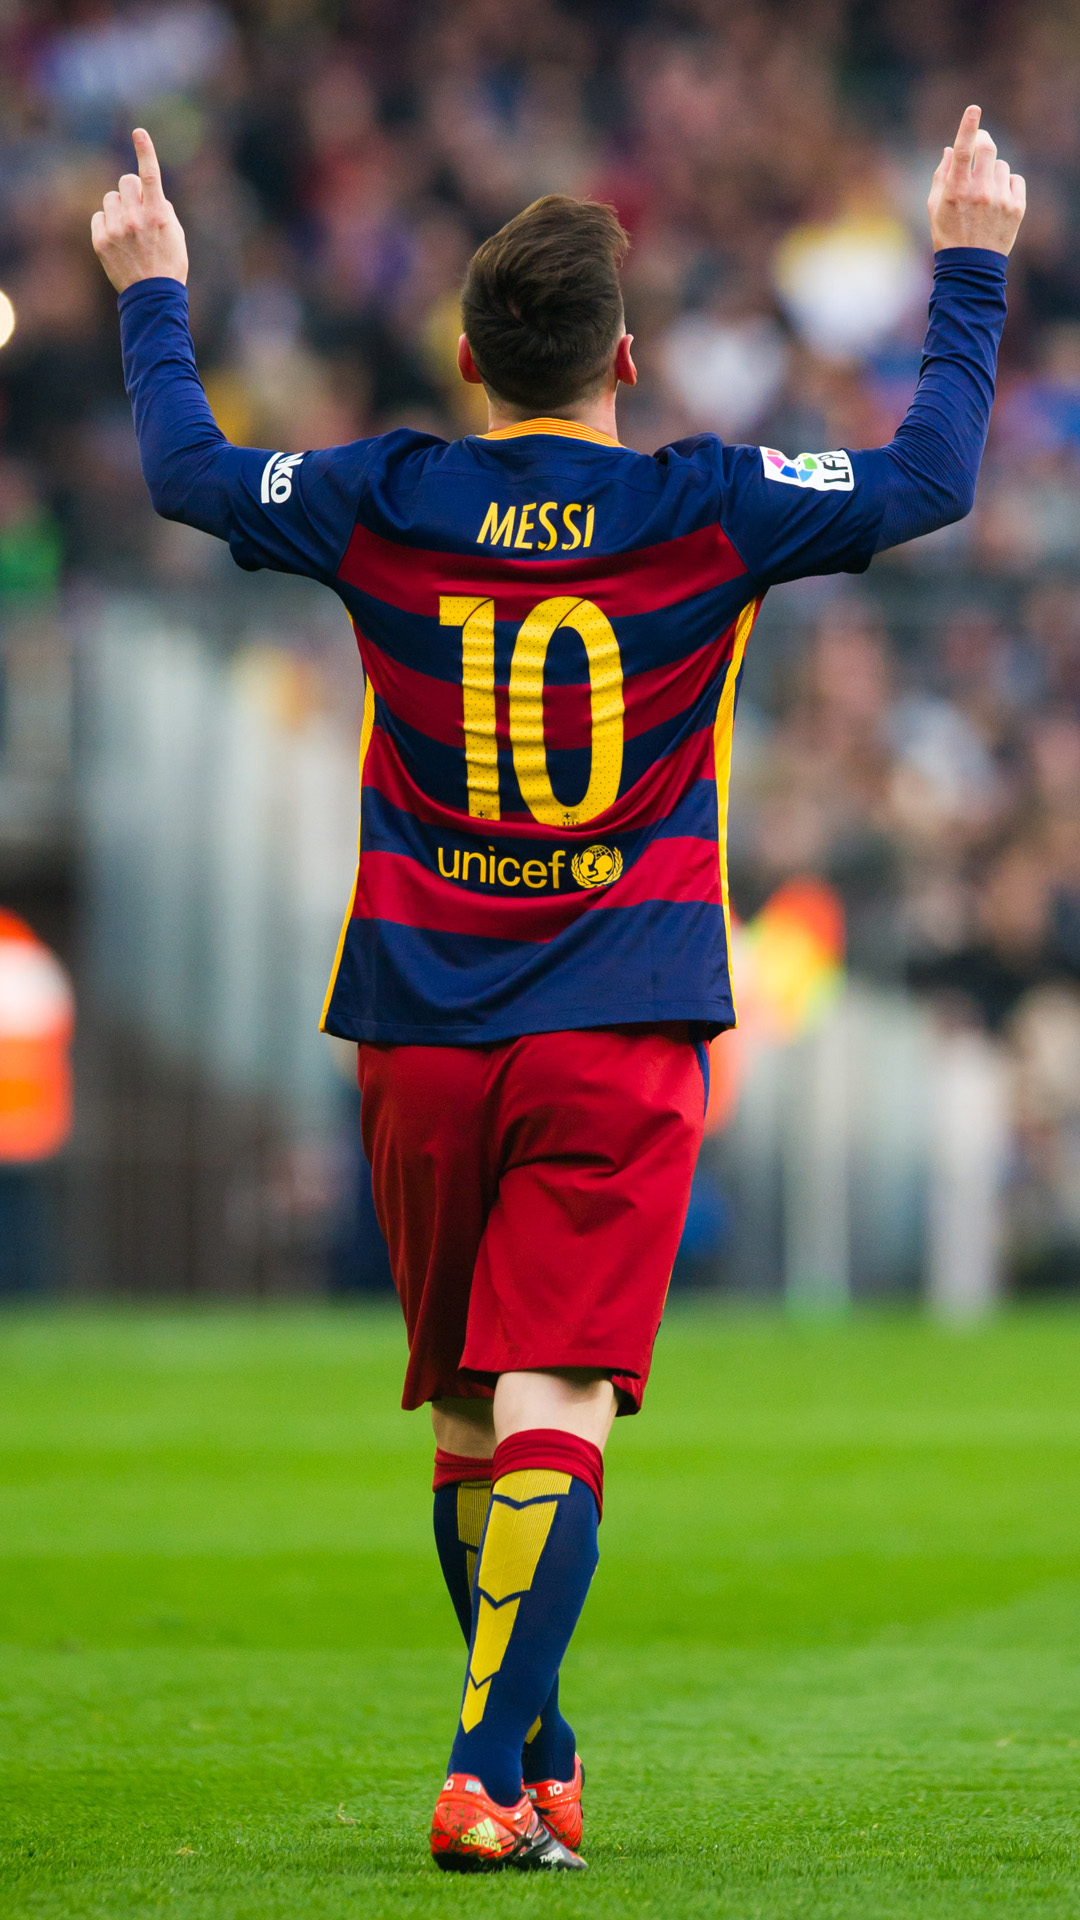 Lionel Messi Football Player 10 - Download Mobile Phone full HD wallpaper